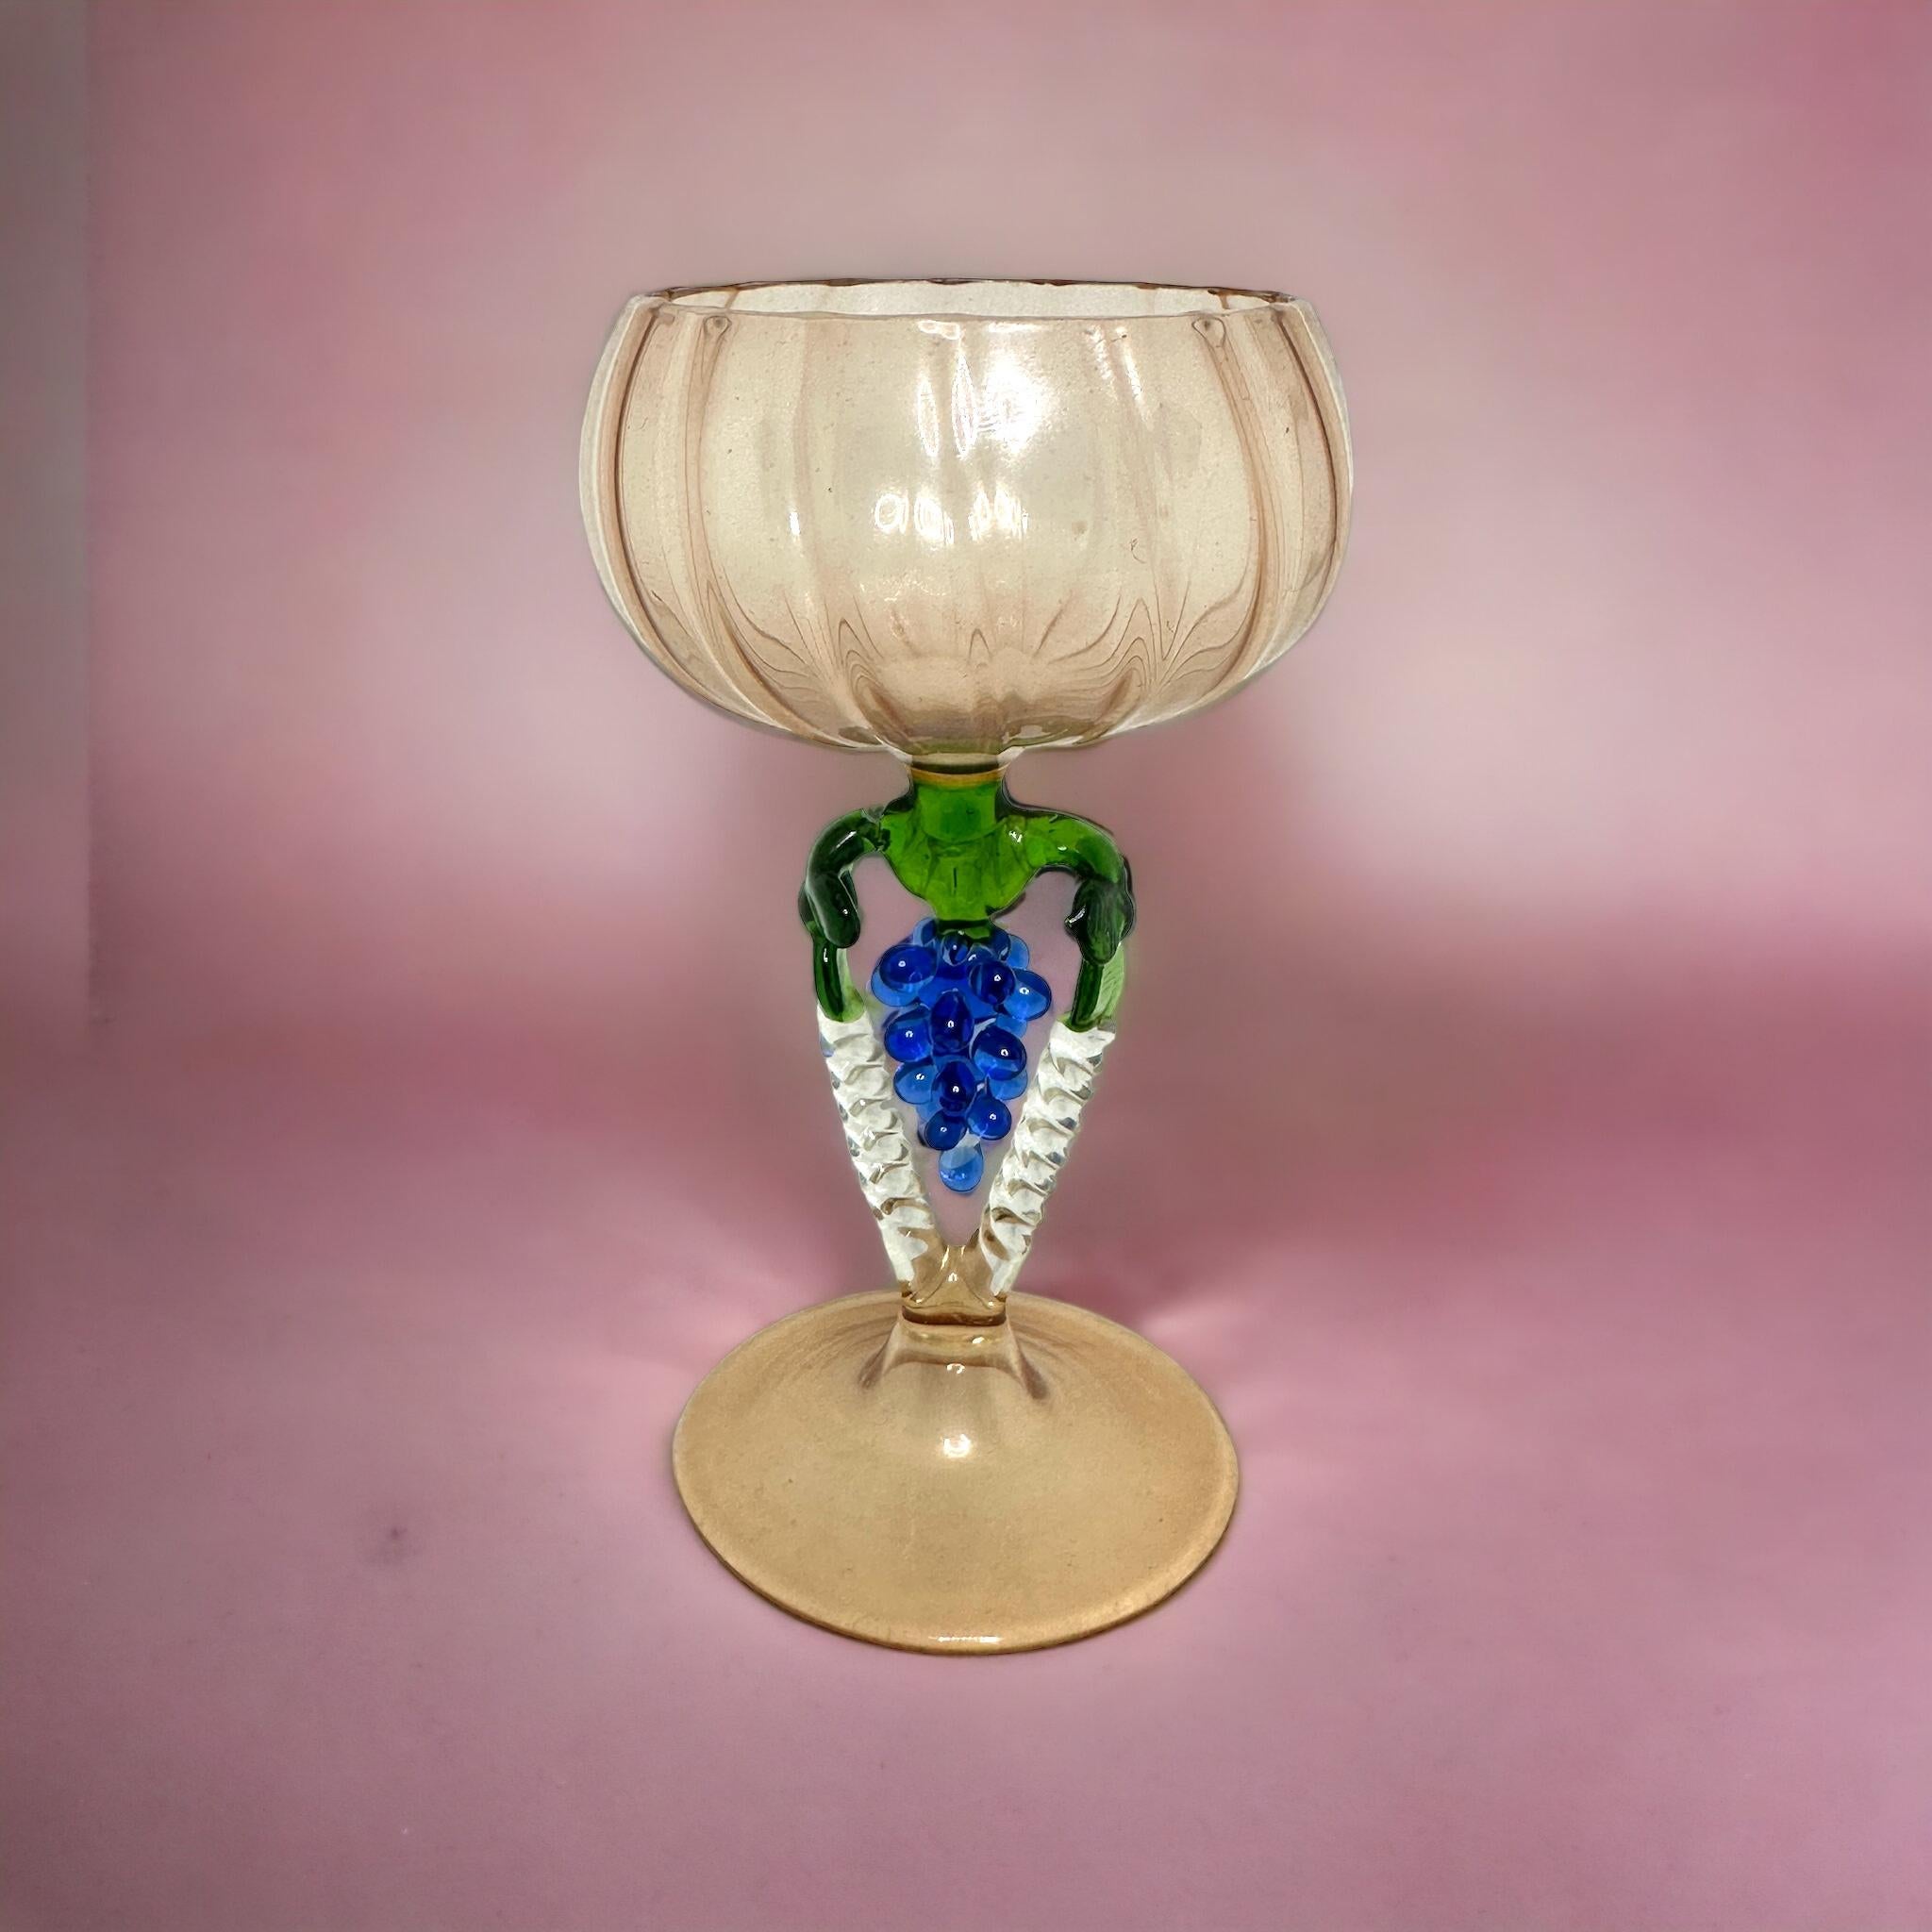 This is a beautiful single vintage stemmed cocktail glass from Austria. It features a bunch of grapes shaft and is in Bimini art style. The light pink glass has an embossed design, the stem is a bunch of grapes in blue color. The base is a beautiful